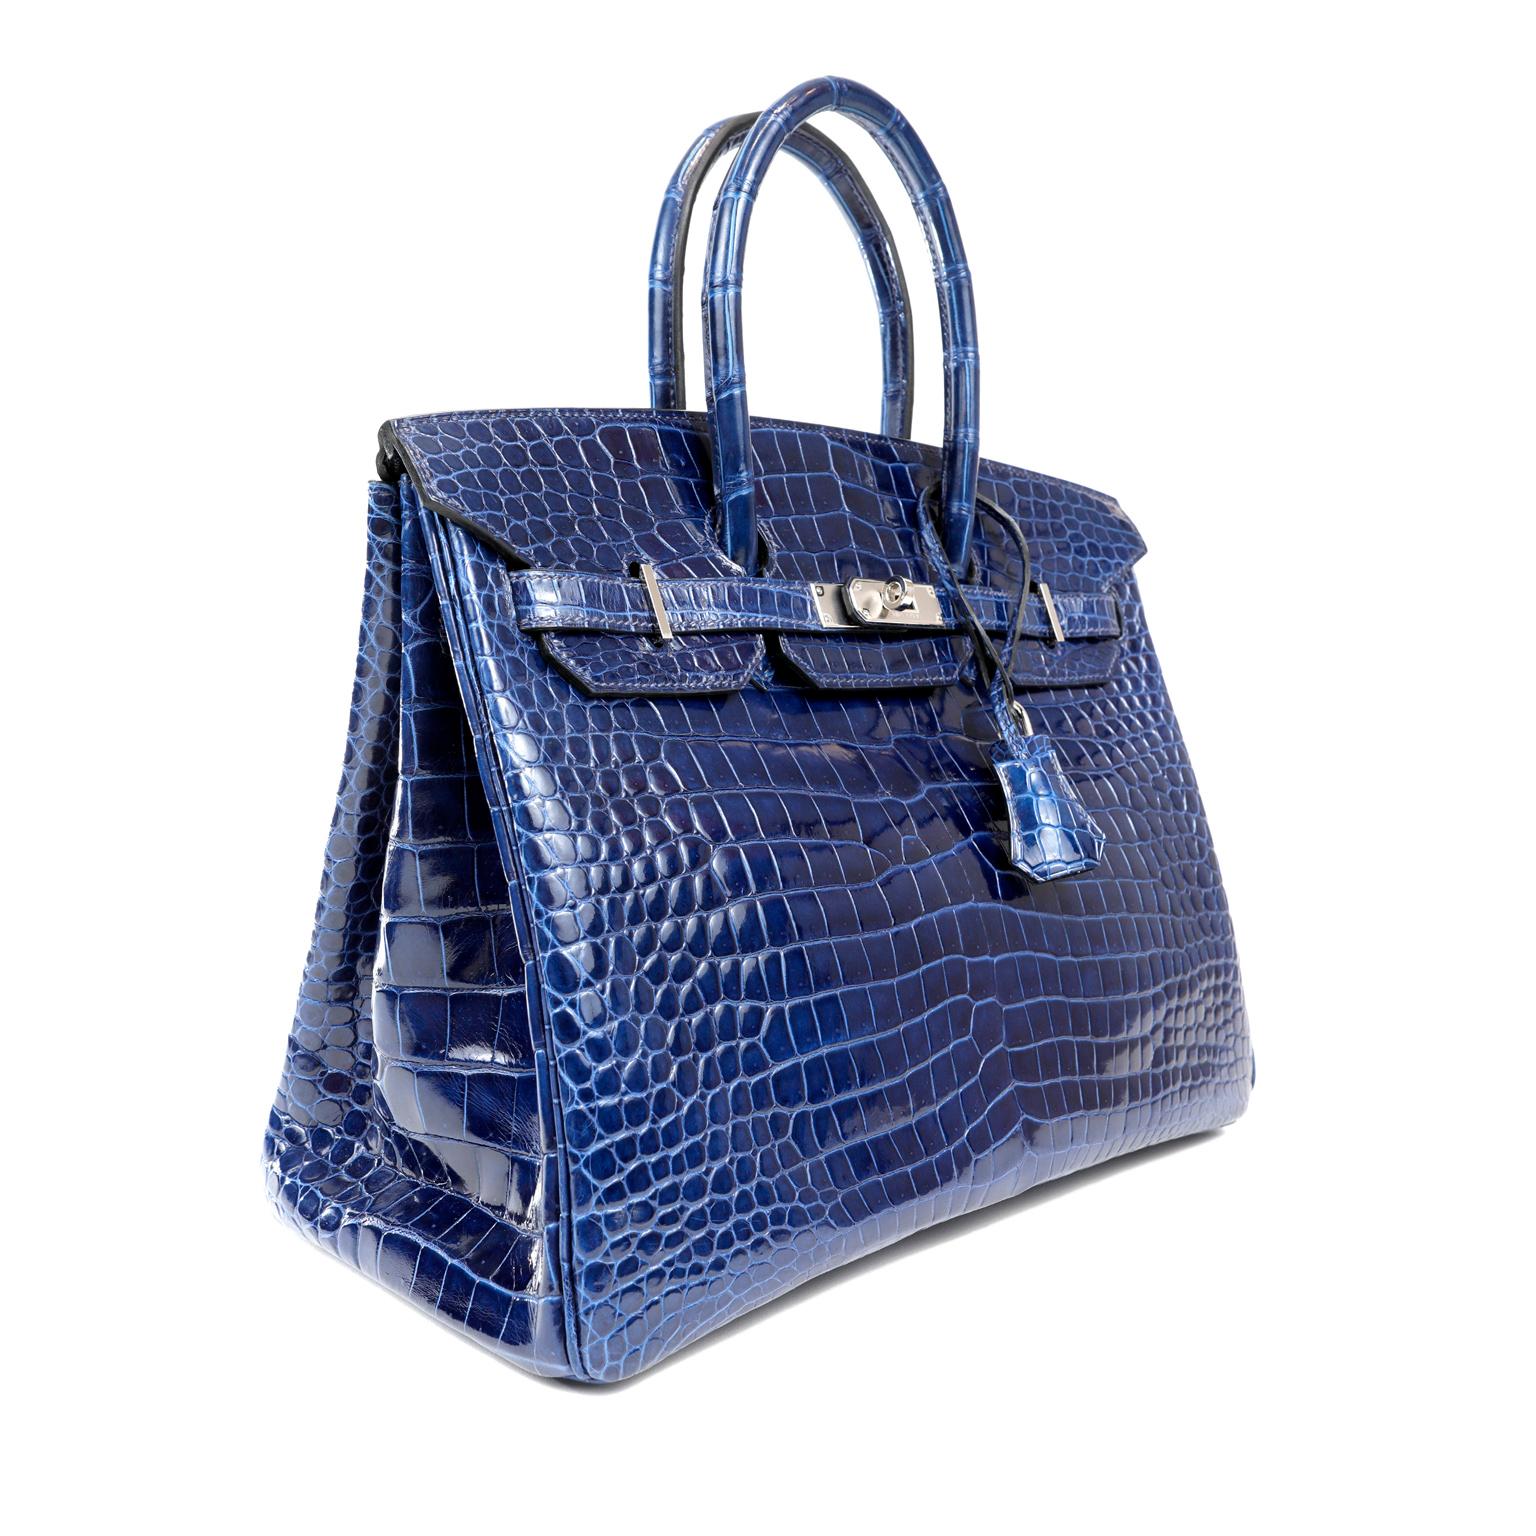 This authentic Hermès Blue Crocodile 35 cm Birkin is in pristine  unworn condition with the protective plastic intact on the hardware.   Hermès bags are considered the ultimate luxury item the world over.  Hand stitched by skilled craftsmen, wait